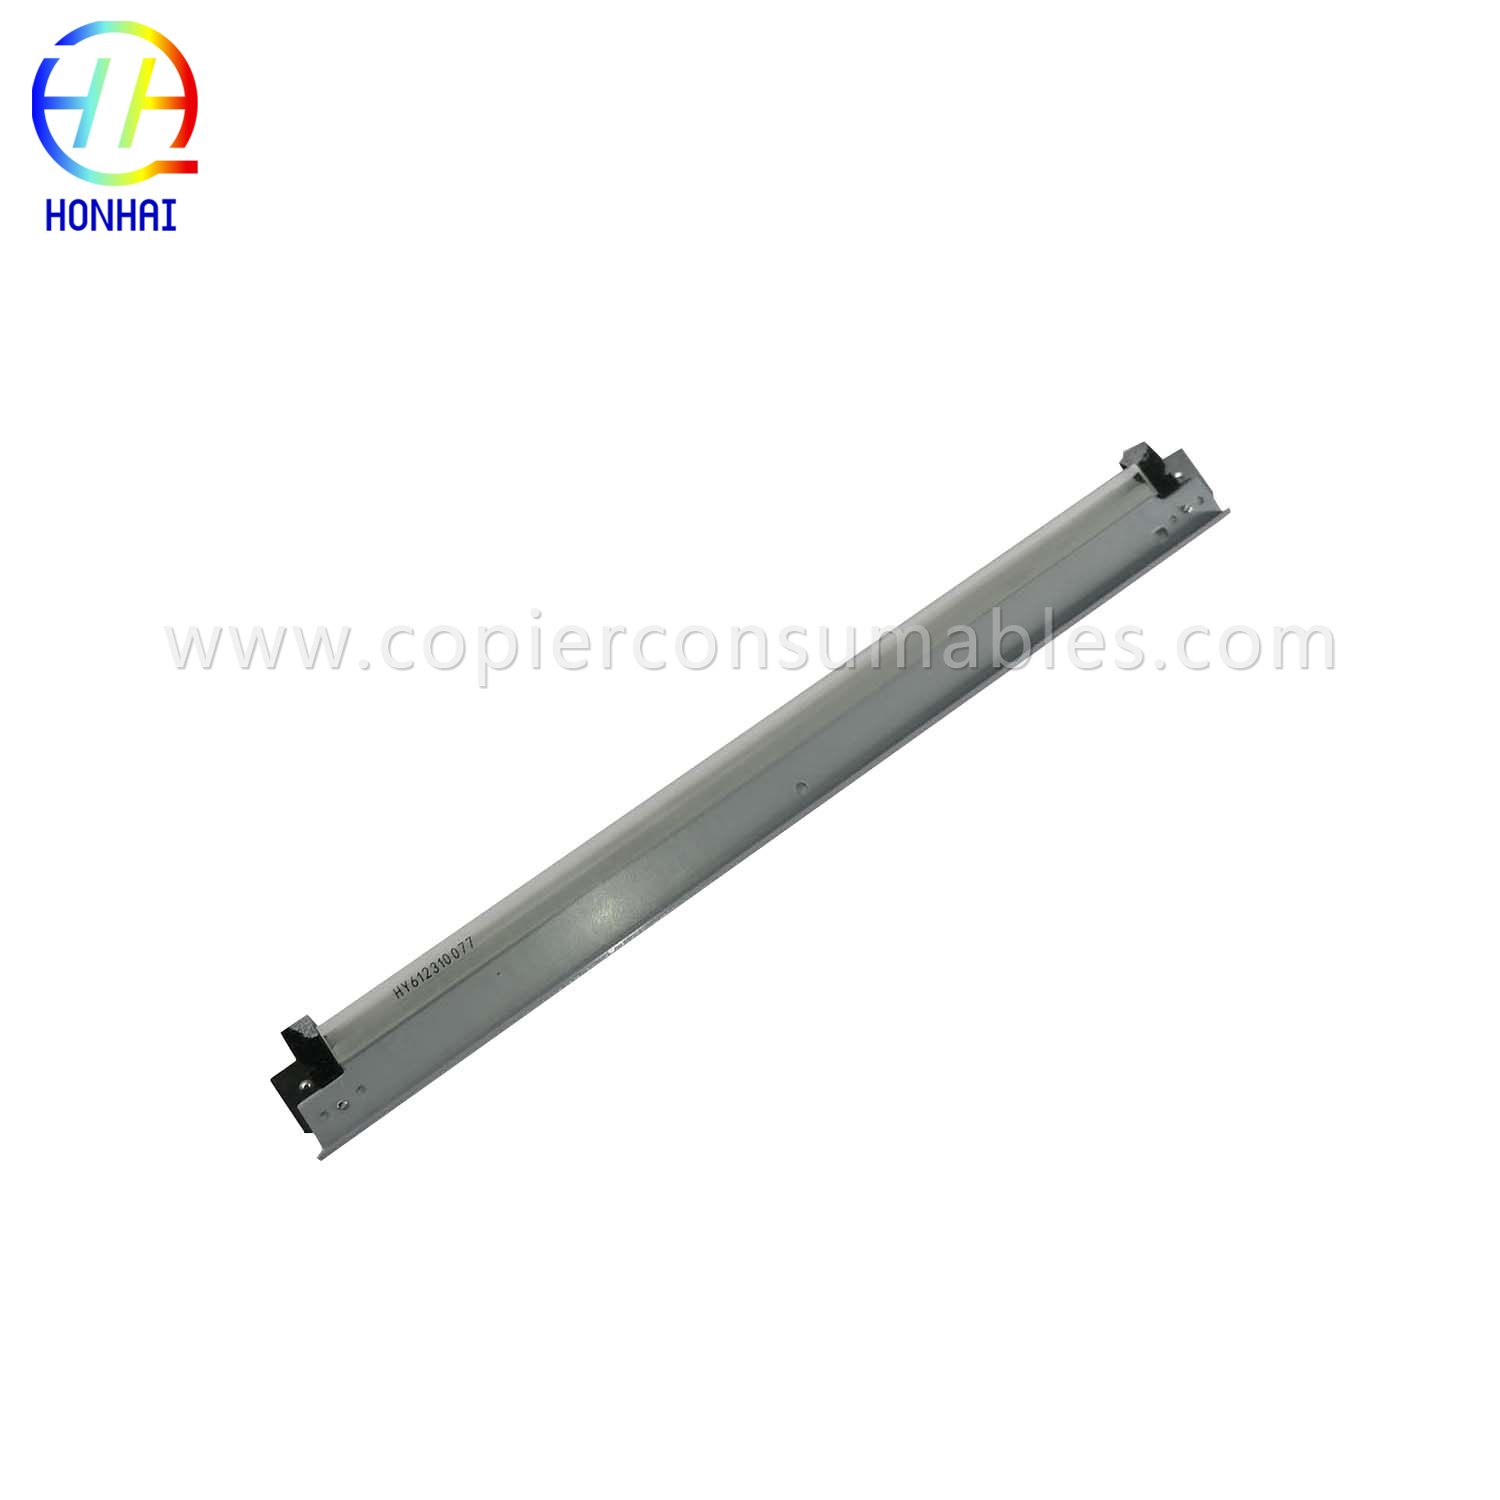 Transfer Belt Cleaning Blade for Canon IR ADVANCE C5035 C5051 C5240 C5250 (6) 拷贝